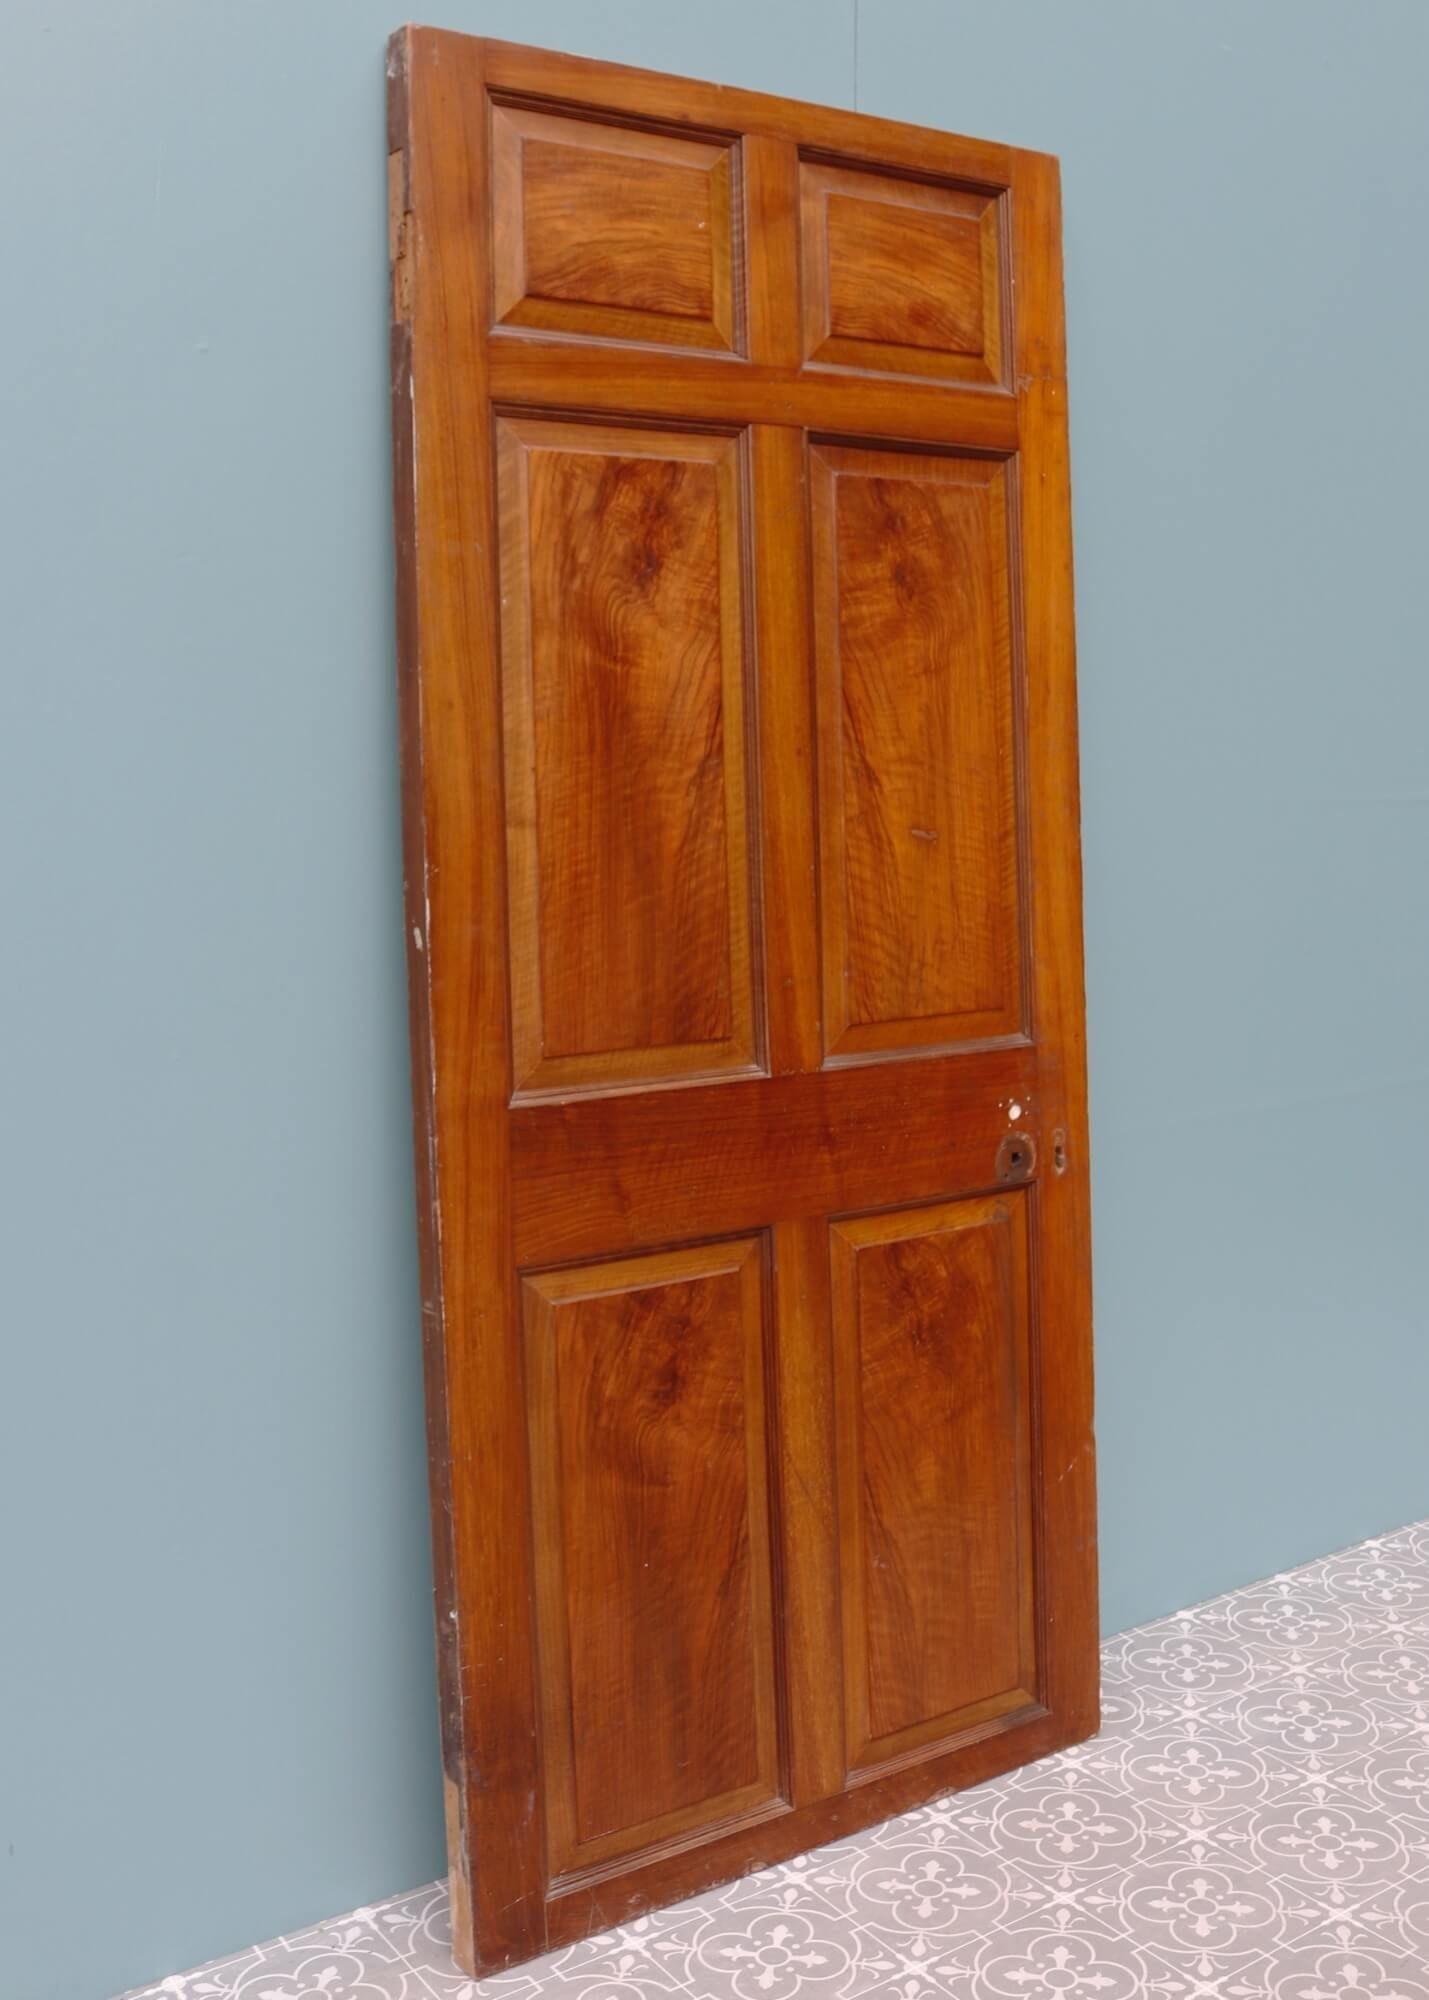 A reclaimed Georgian internal door dating from the early 19th century. Constructed from pine, this six-panel interior door is dual-coloured with differing details to the front and the back. The front is walnut veneered, displaying a handsome grain